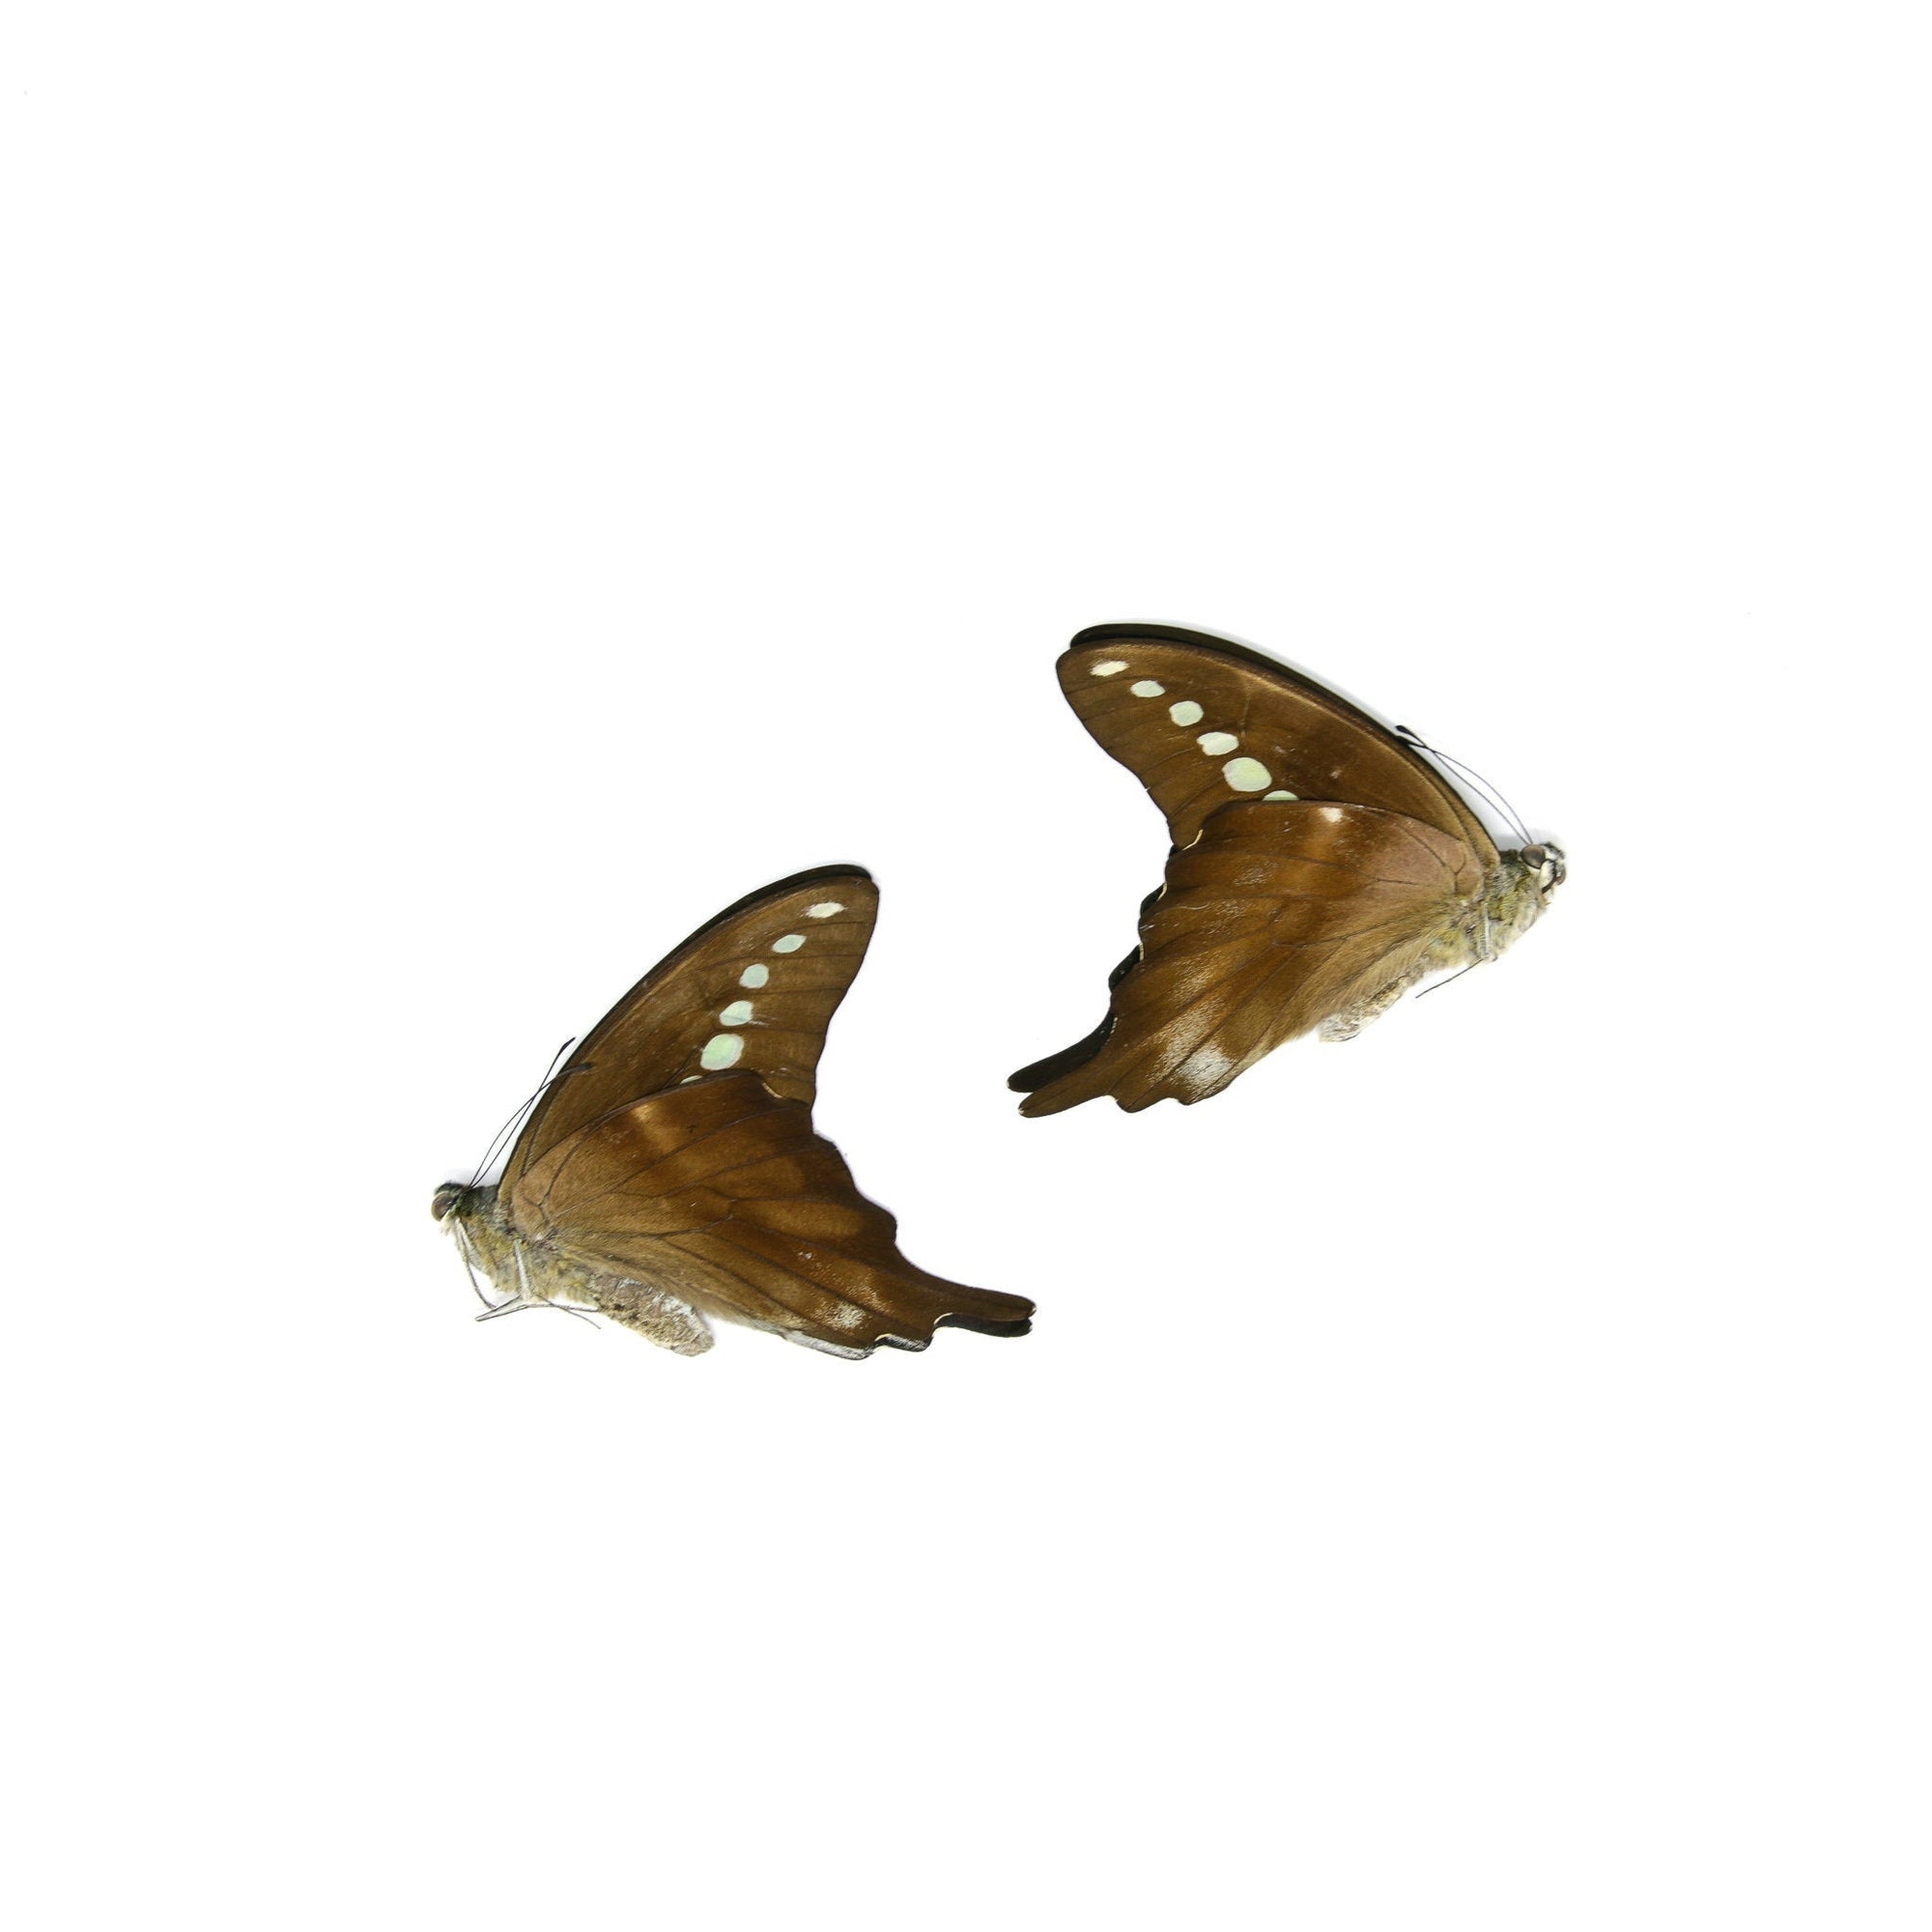 2 x Green Banded Swallowtail | Graphium codrus | Dry-Preserved Unmounted Butterfly Specimens A1